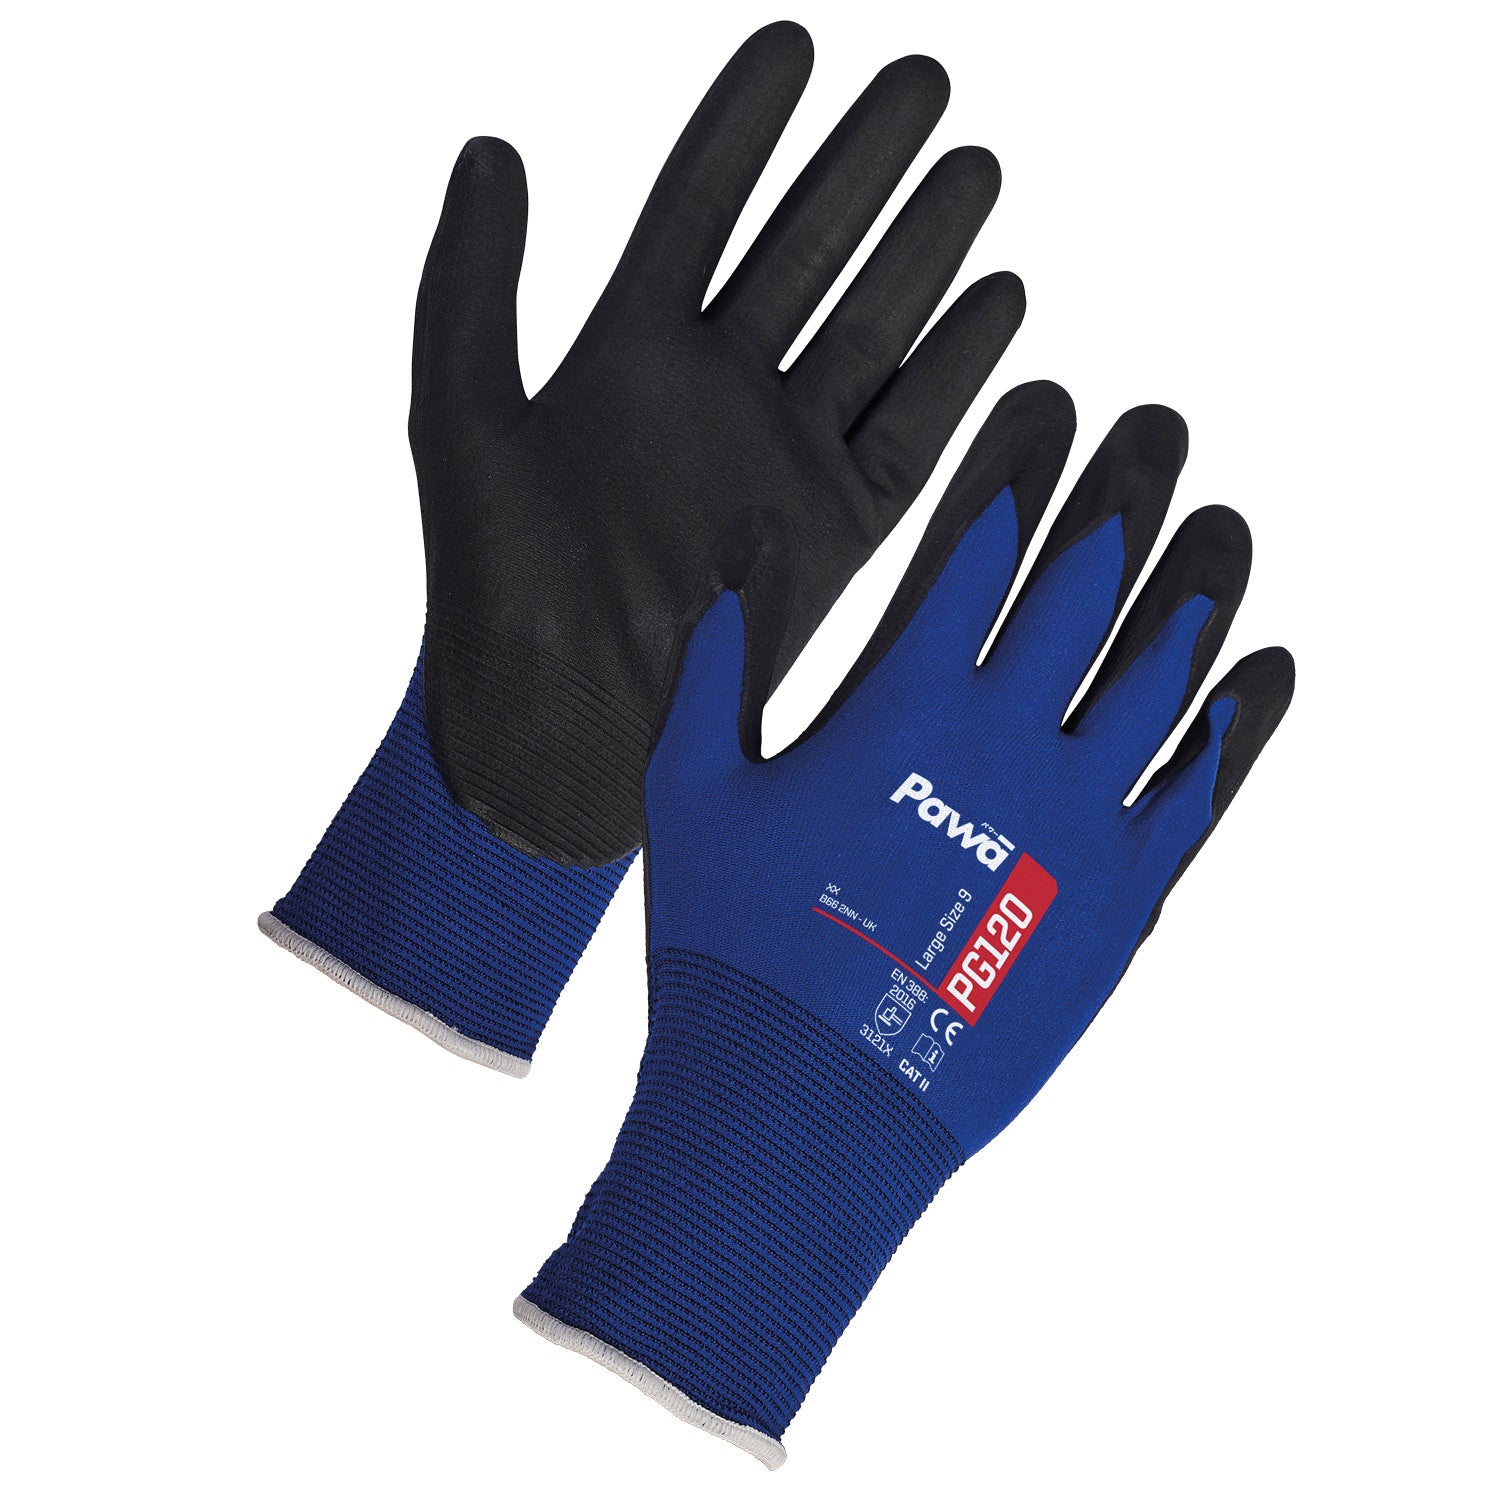 Supertouch Pawa PG120 Gloves